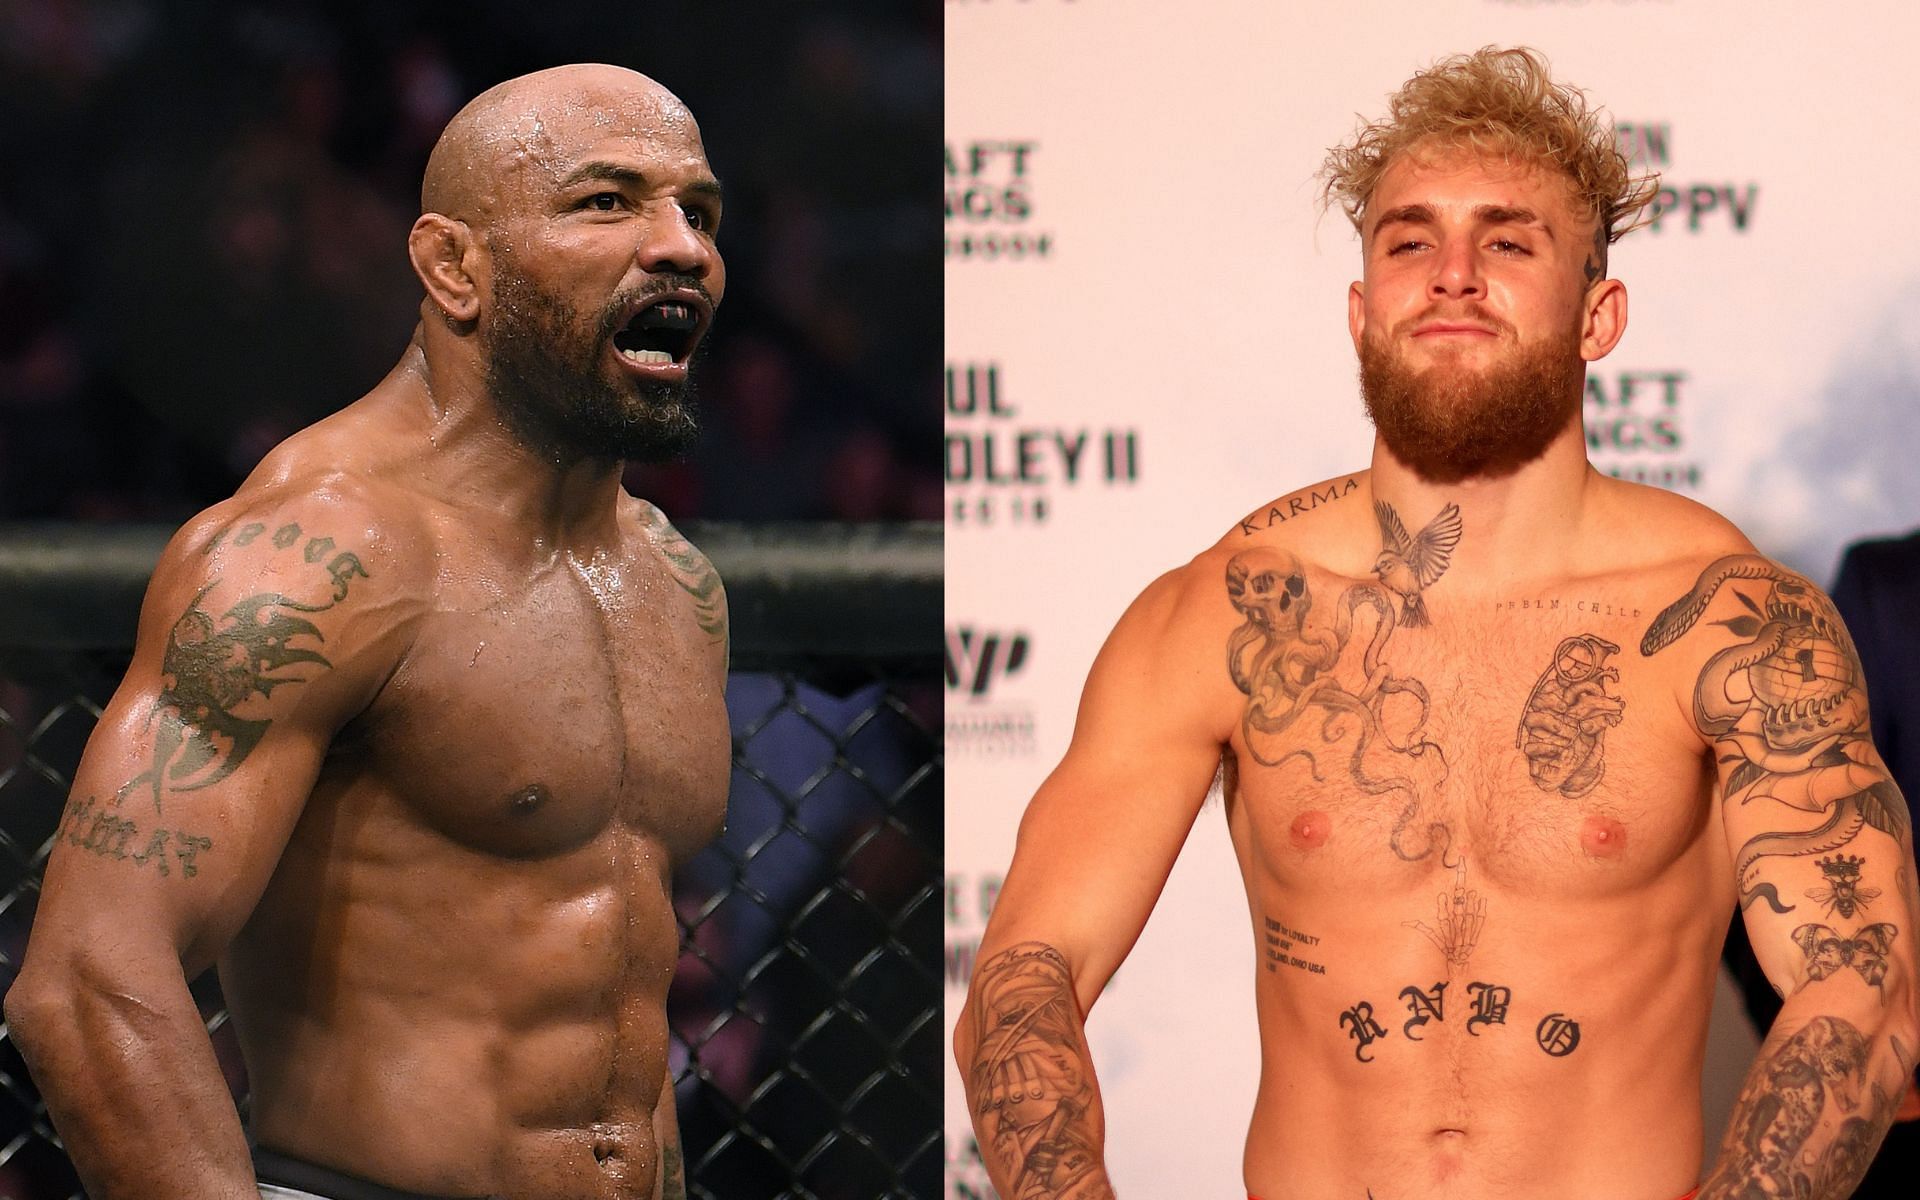 Yoel Romero (left) and Jake Paul (right). [Images courtesy: Getty Images]